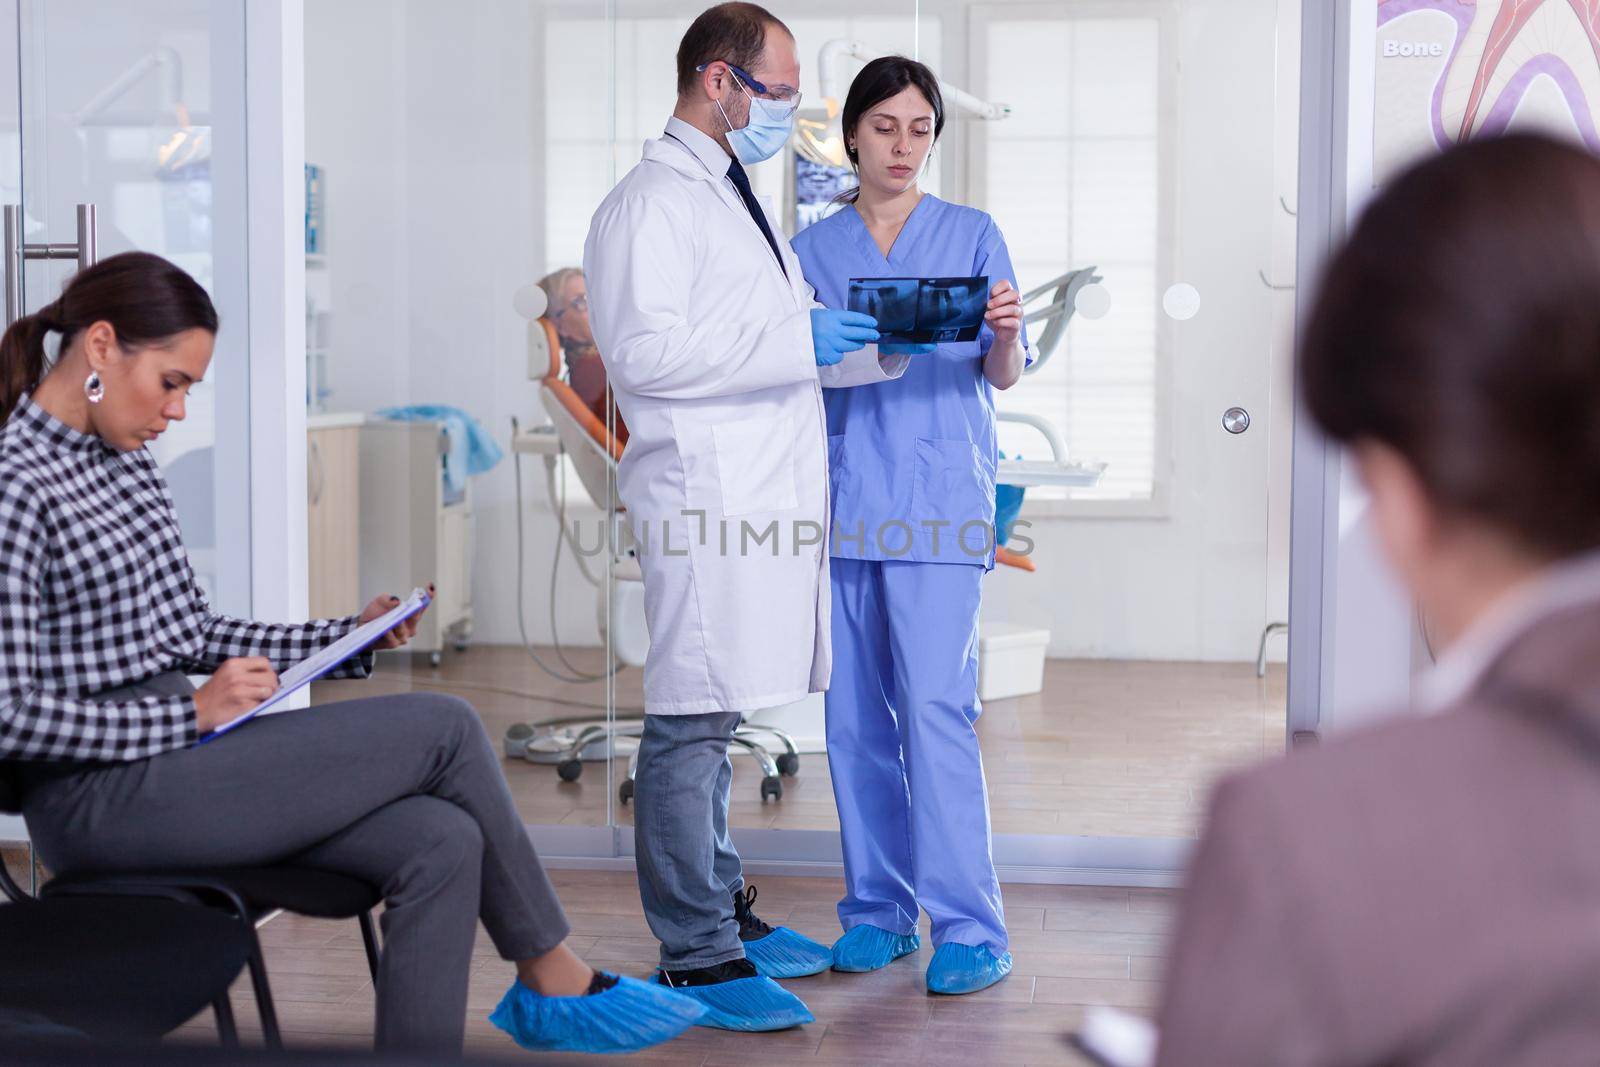 Dentist in stomatology waiting area holding patient x-ray by DCStudio